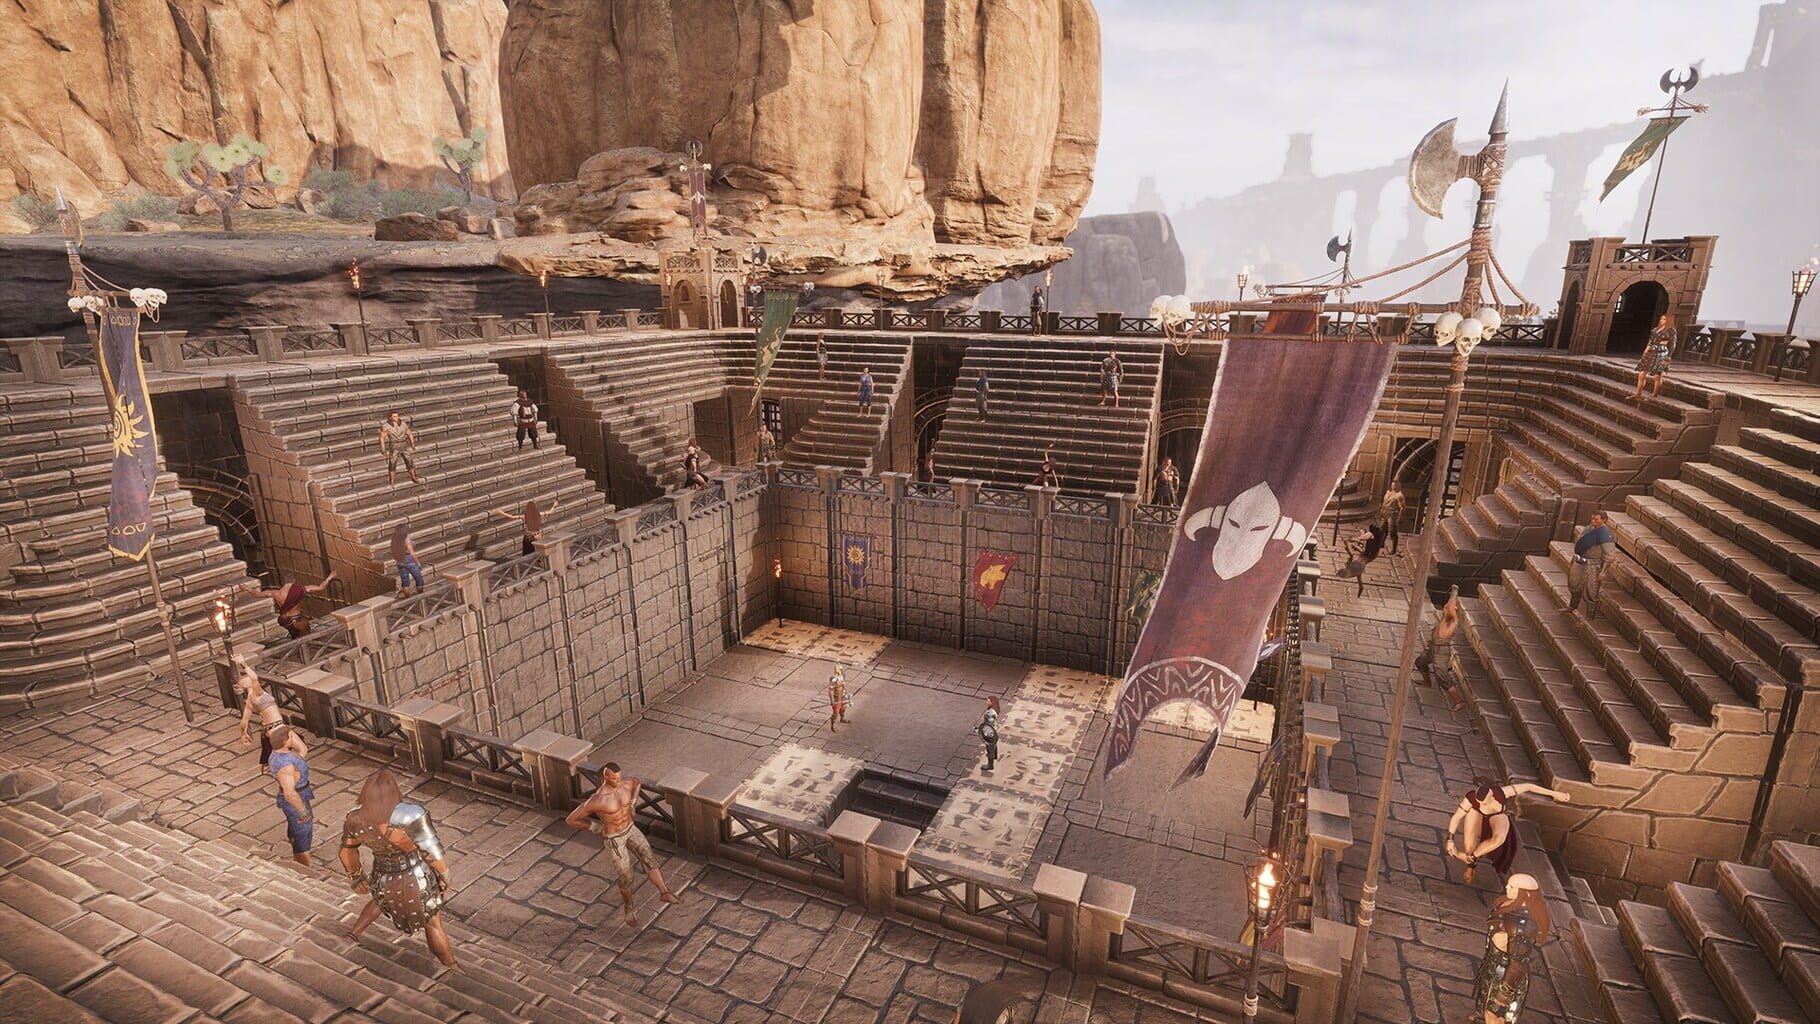 Conan Exiles: Blood and Sand Pack Image